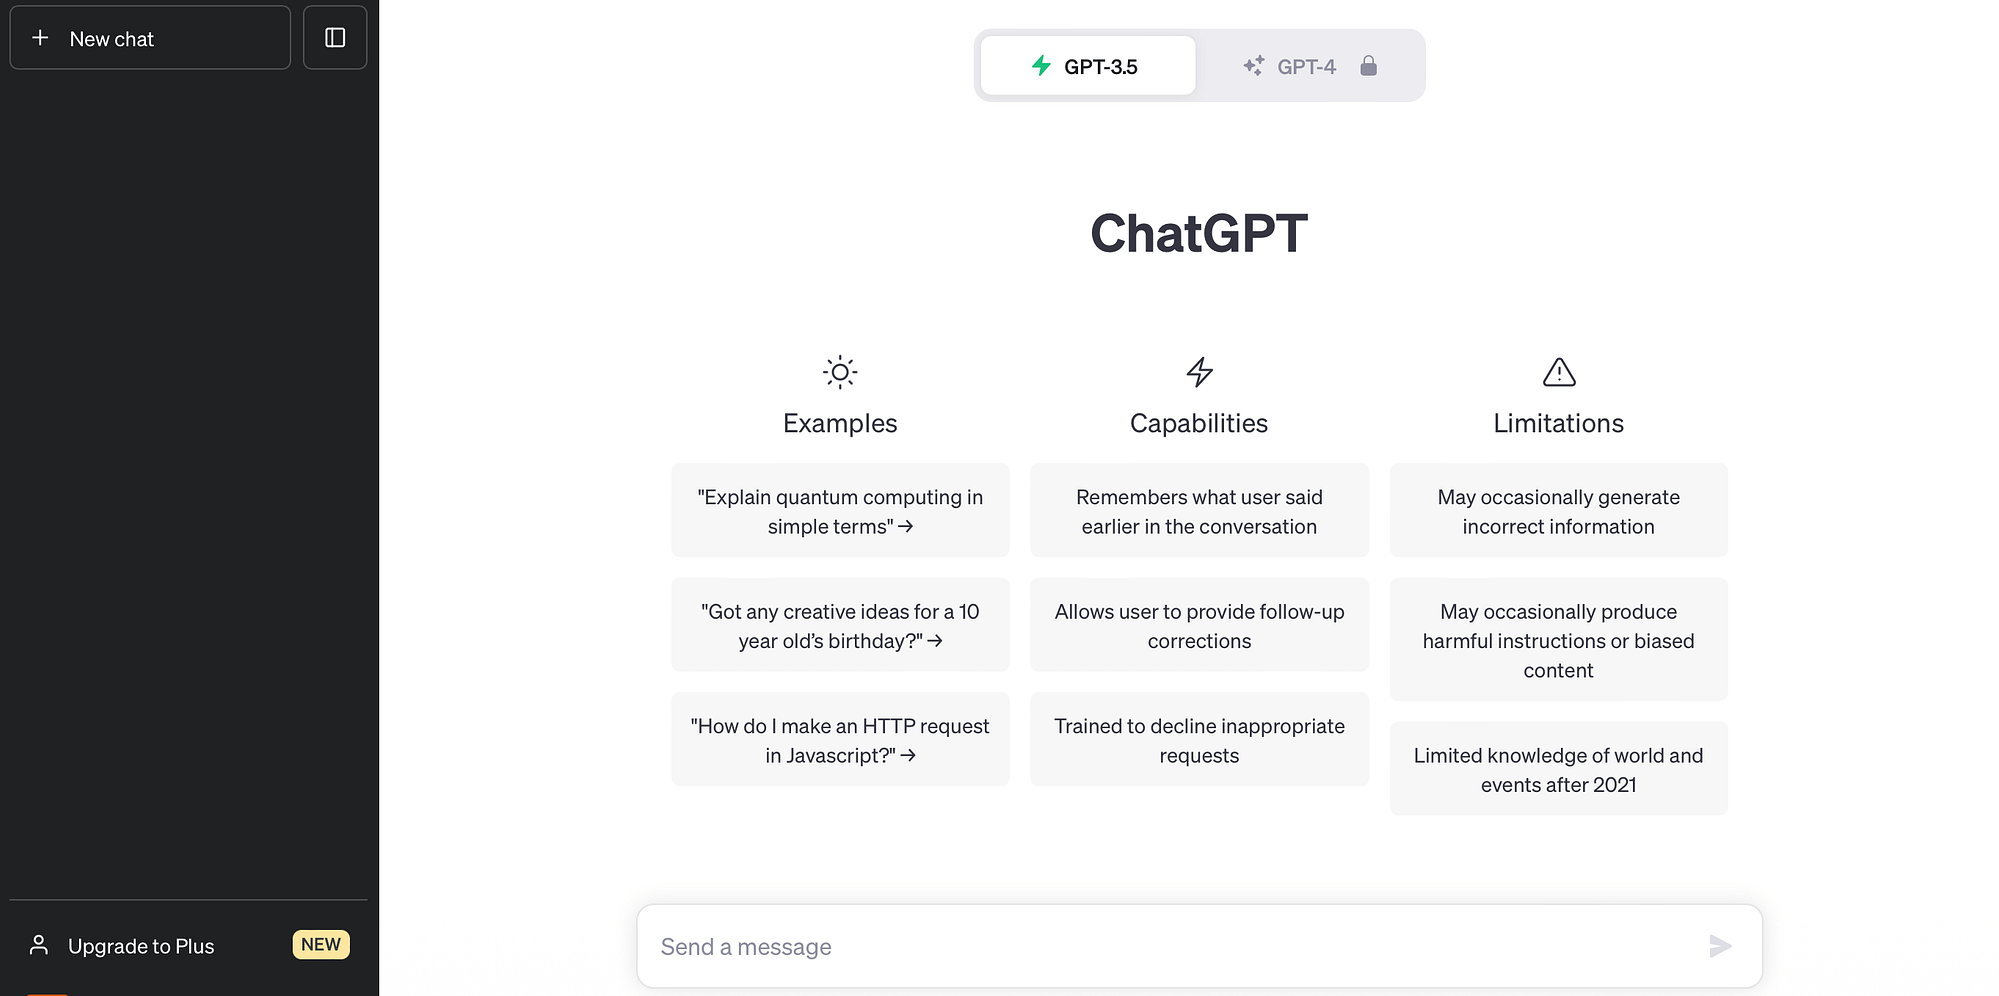 The ChatGPT interface when you log into your account.